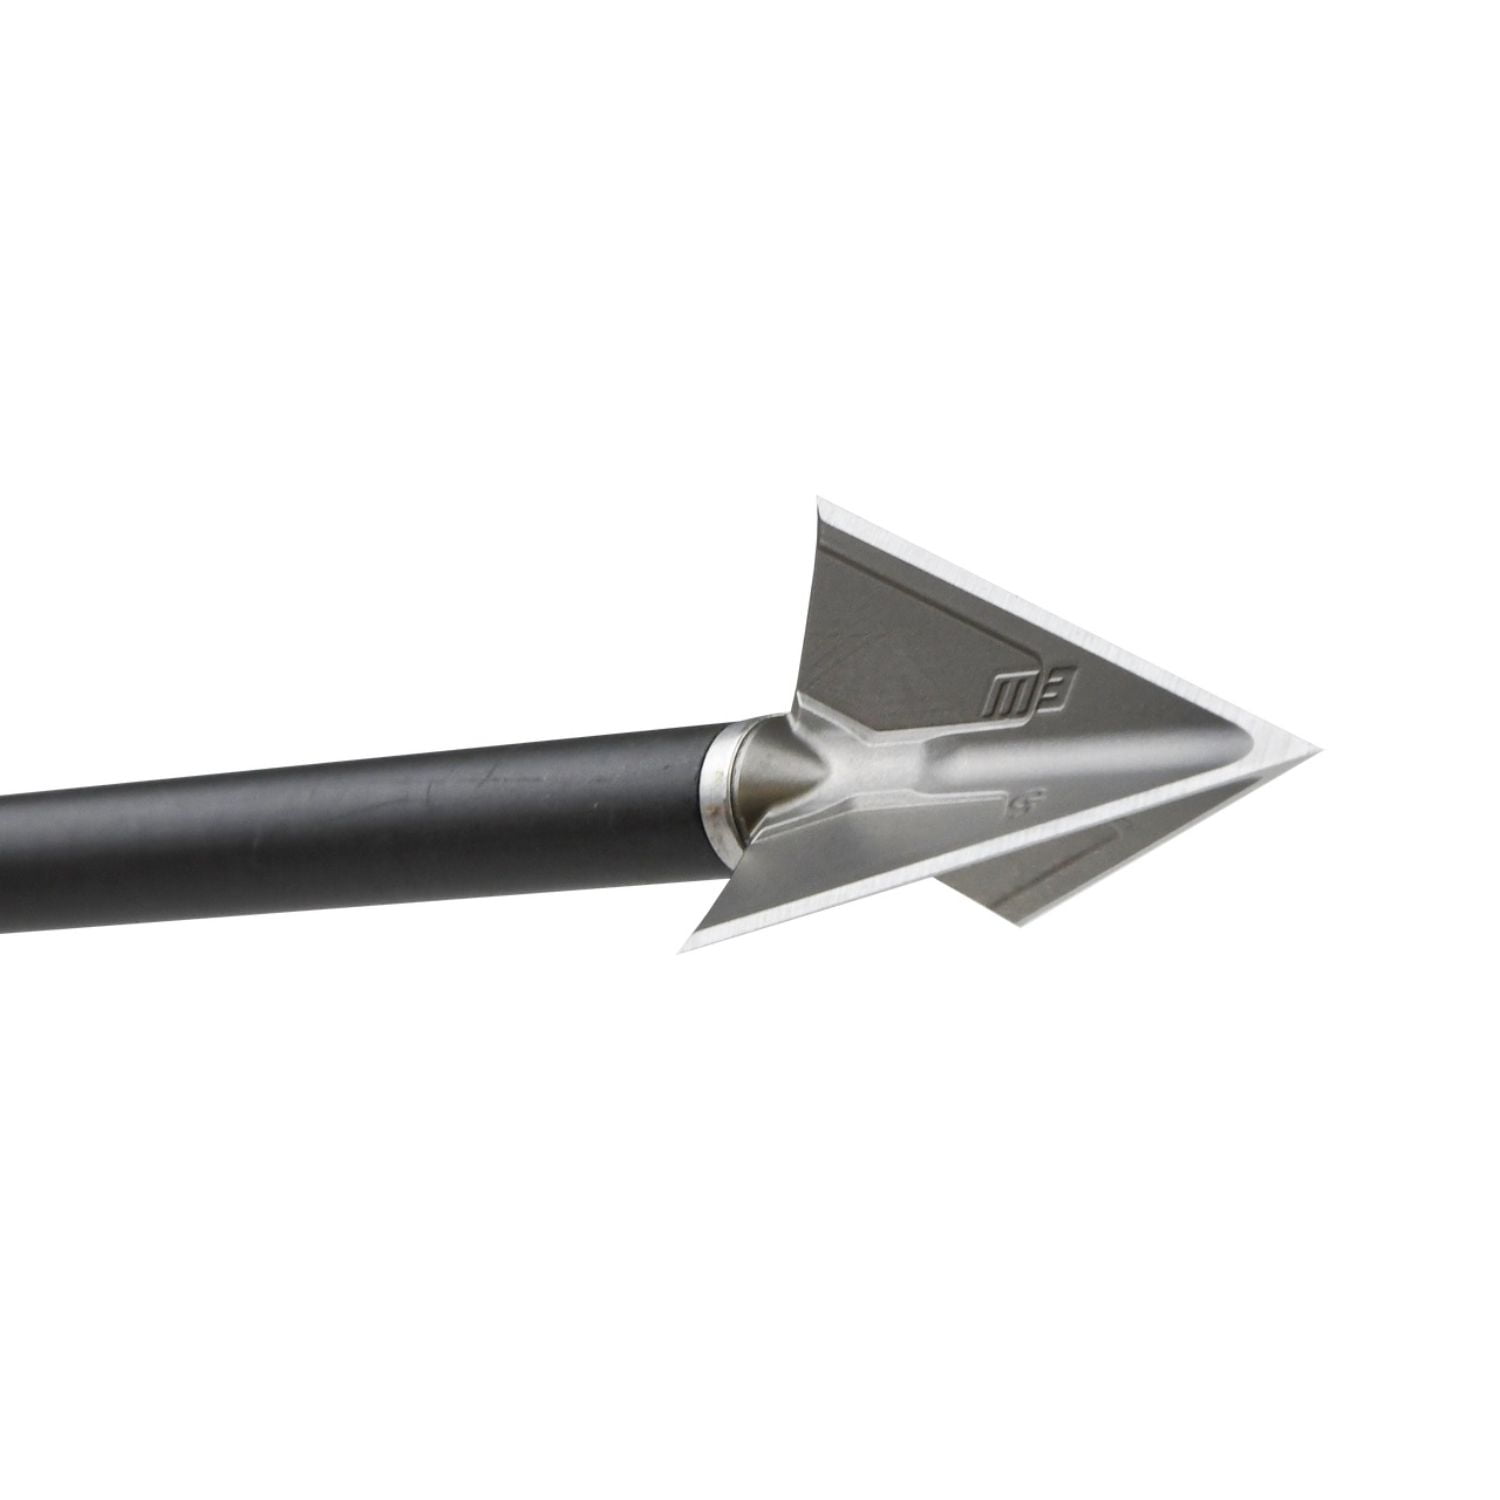  Allen Company Broadhead Sharpener with Built-in